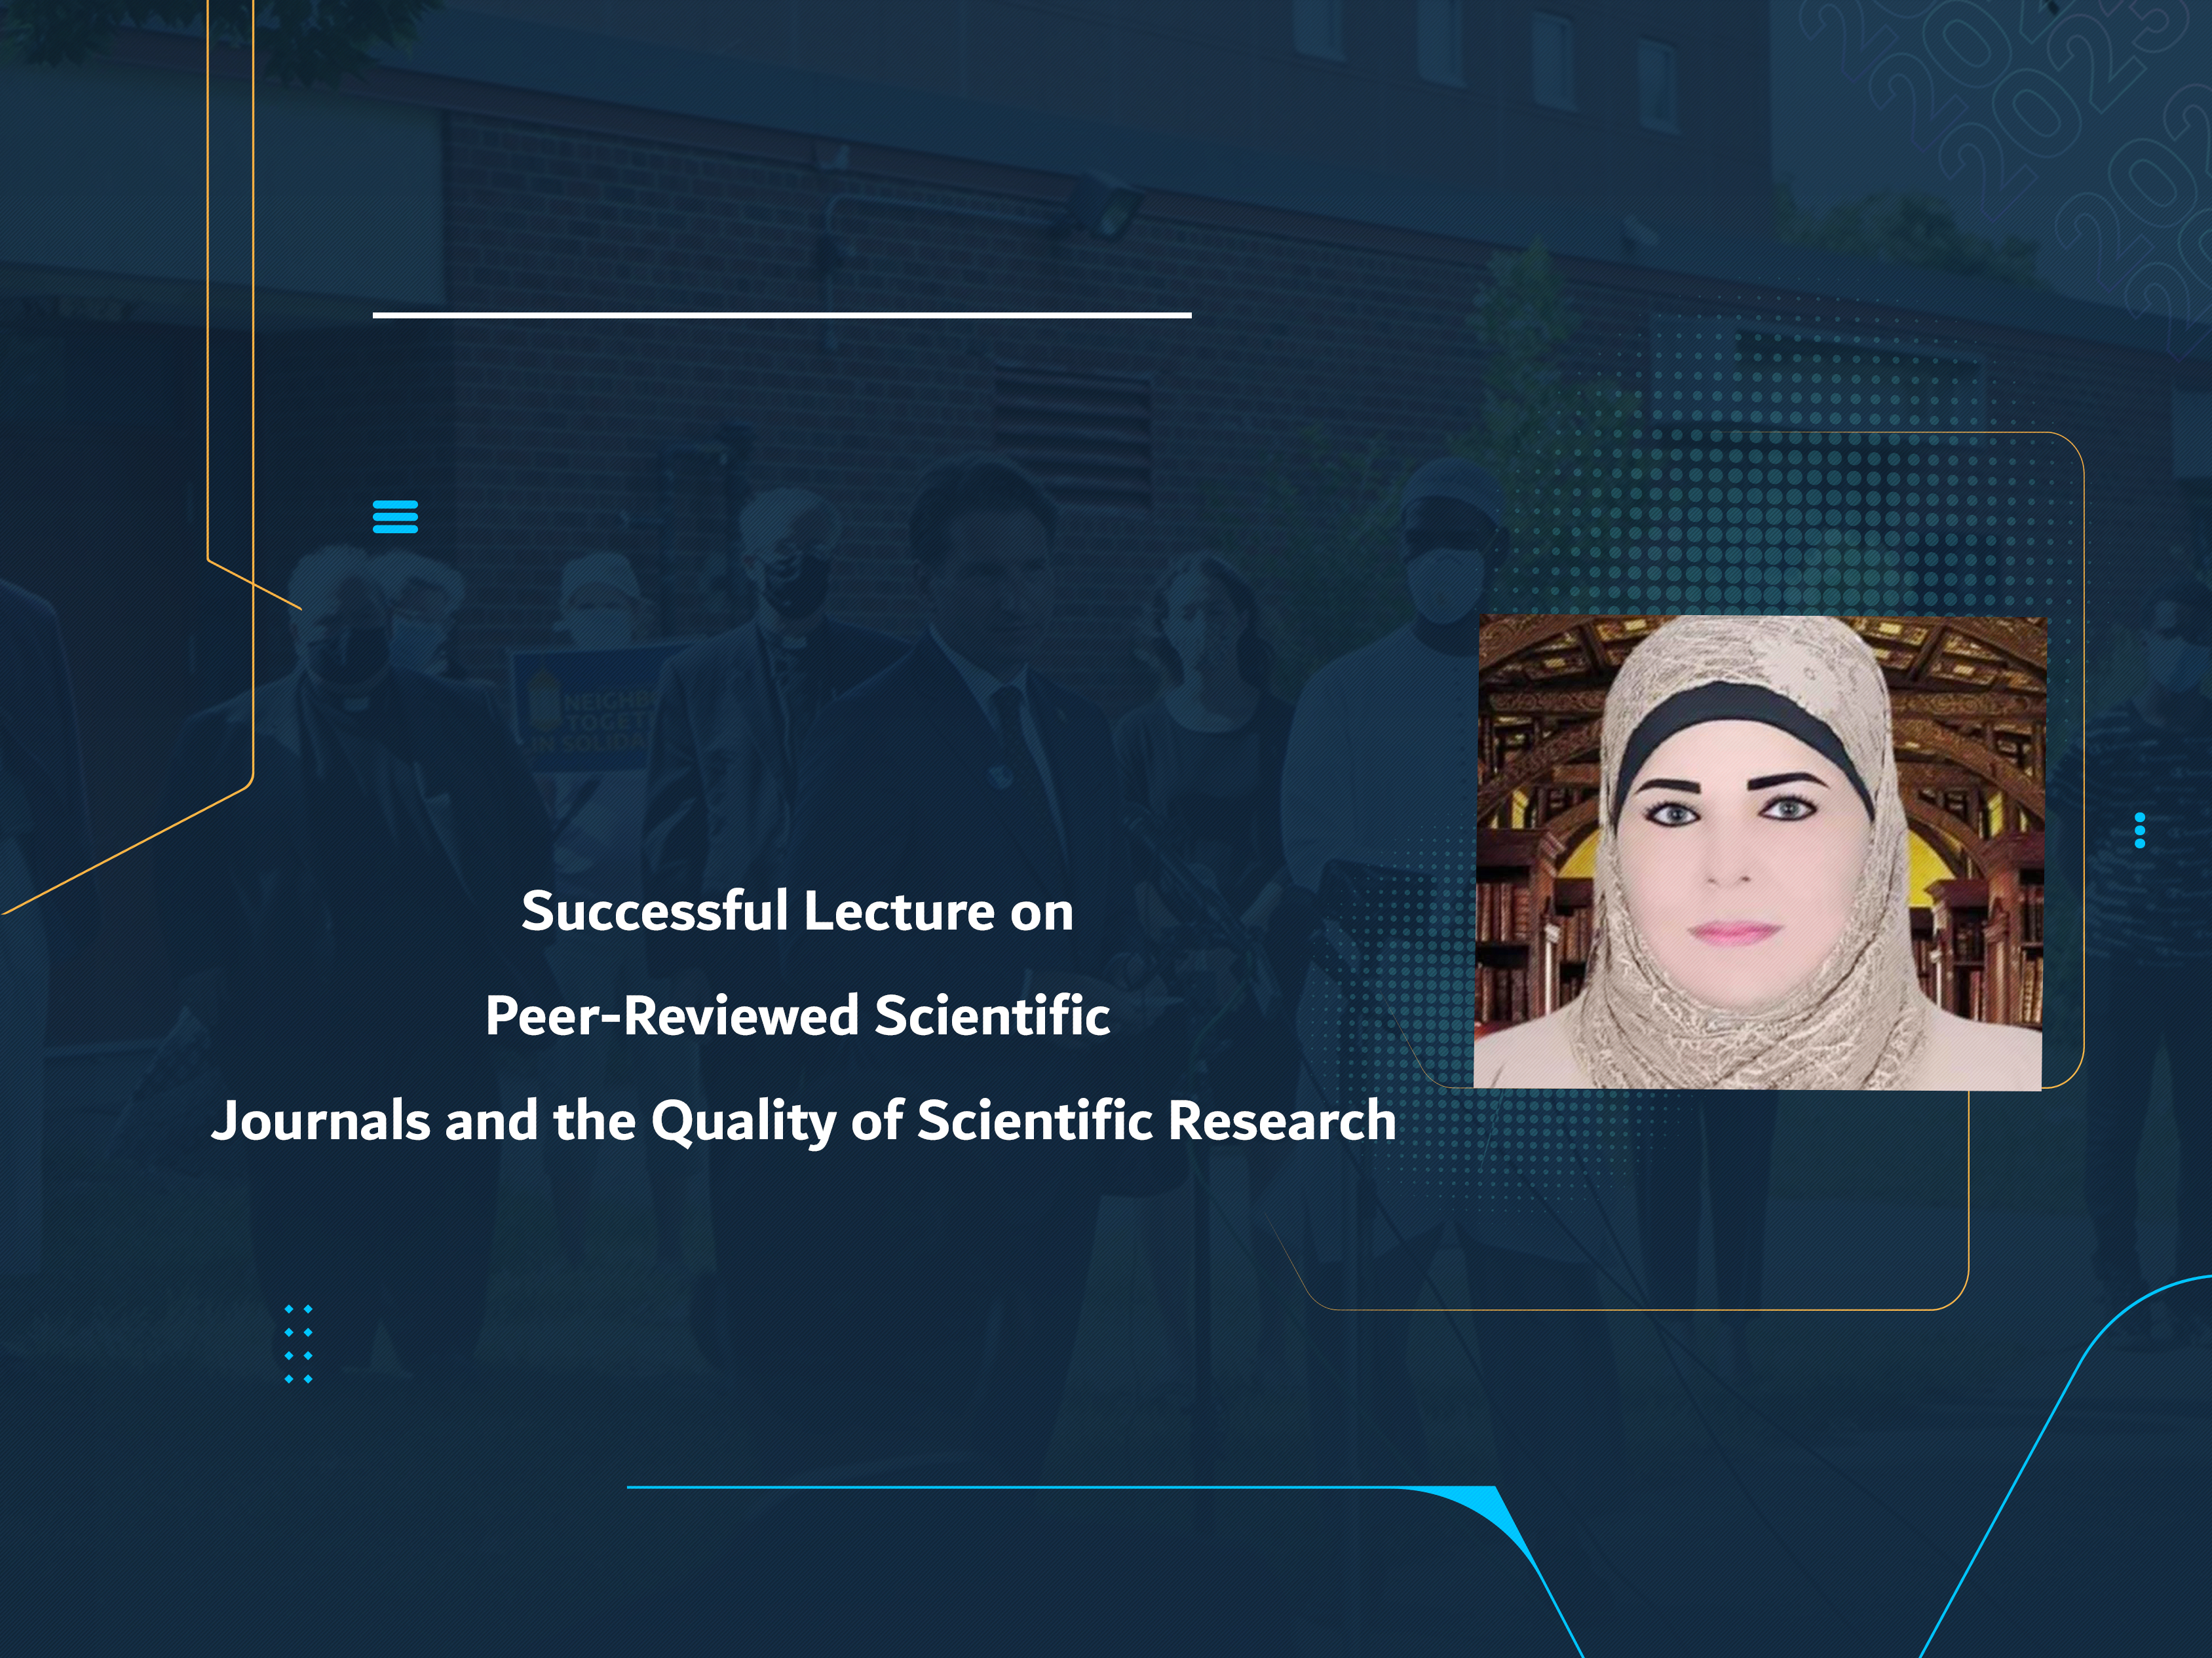 Successful Lecture on Peer-Reviewed Scientific Journals and the Quality of Scientific Research